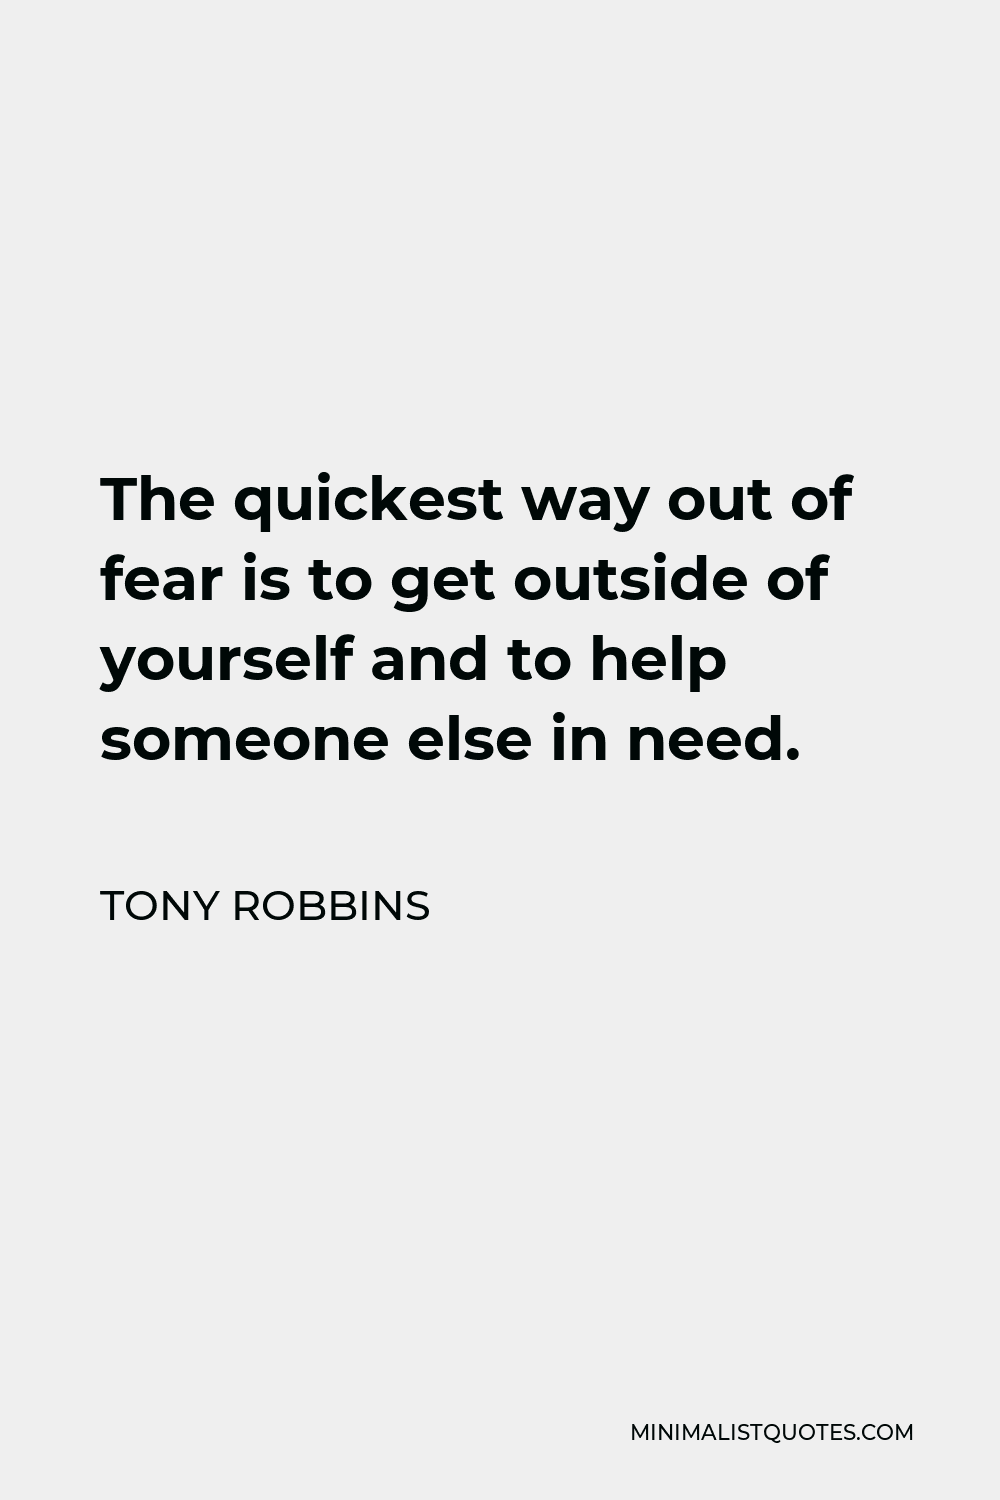 Tony Robbins Quote - The quickest way out of fear is to get outside of yourself and to help someone else in need.